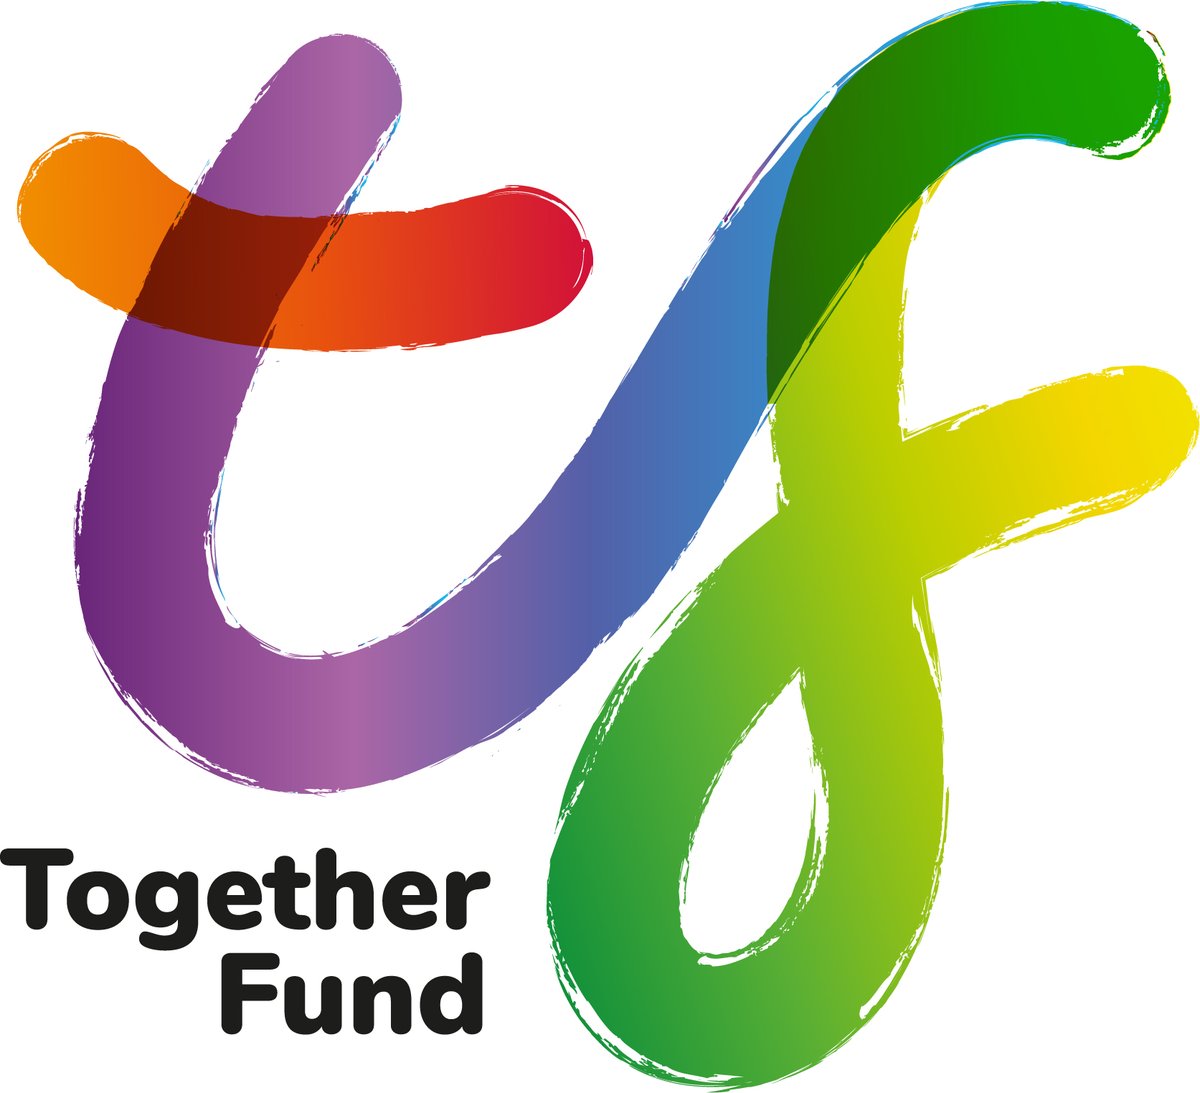 The #TogetherFund has been designed to look at recovery & the long-term impacts of Covid-19. The fund aims to support community organisations working with priority audiences, so they have a future to plan for. 

Apply here: https://t.co/IBby6kBwxH